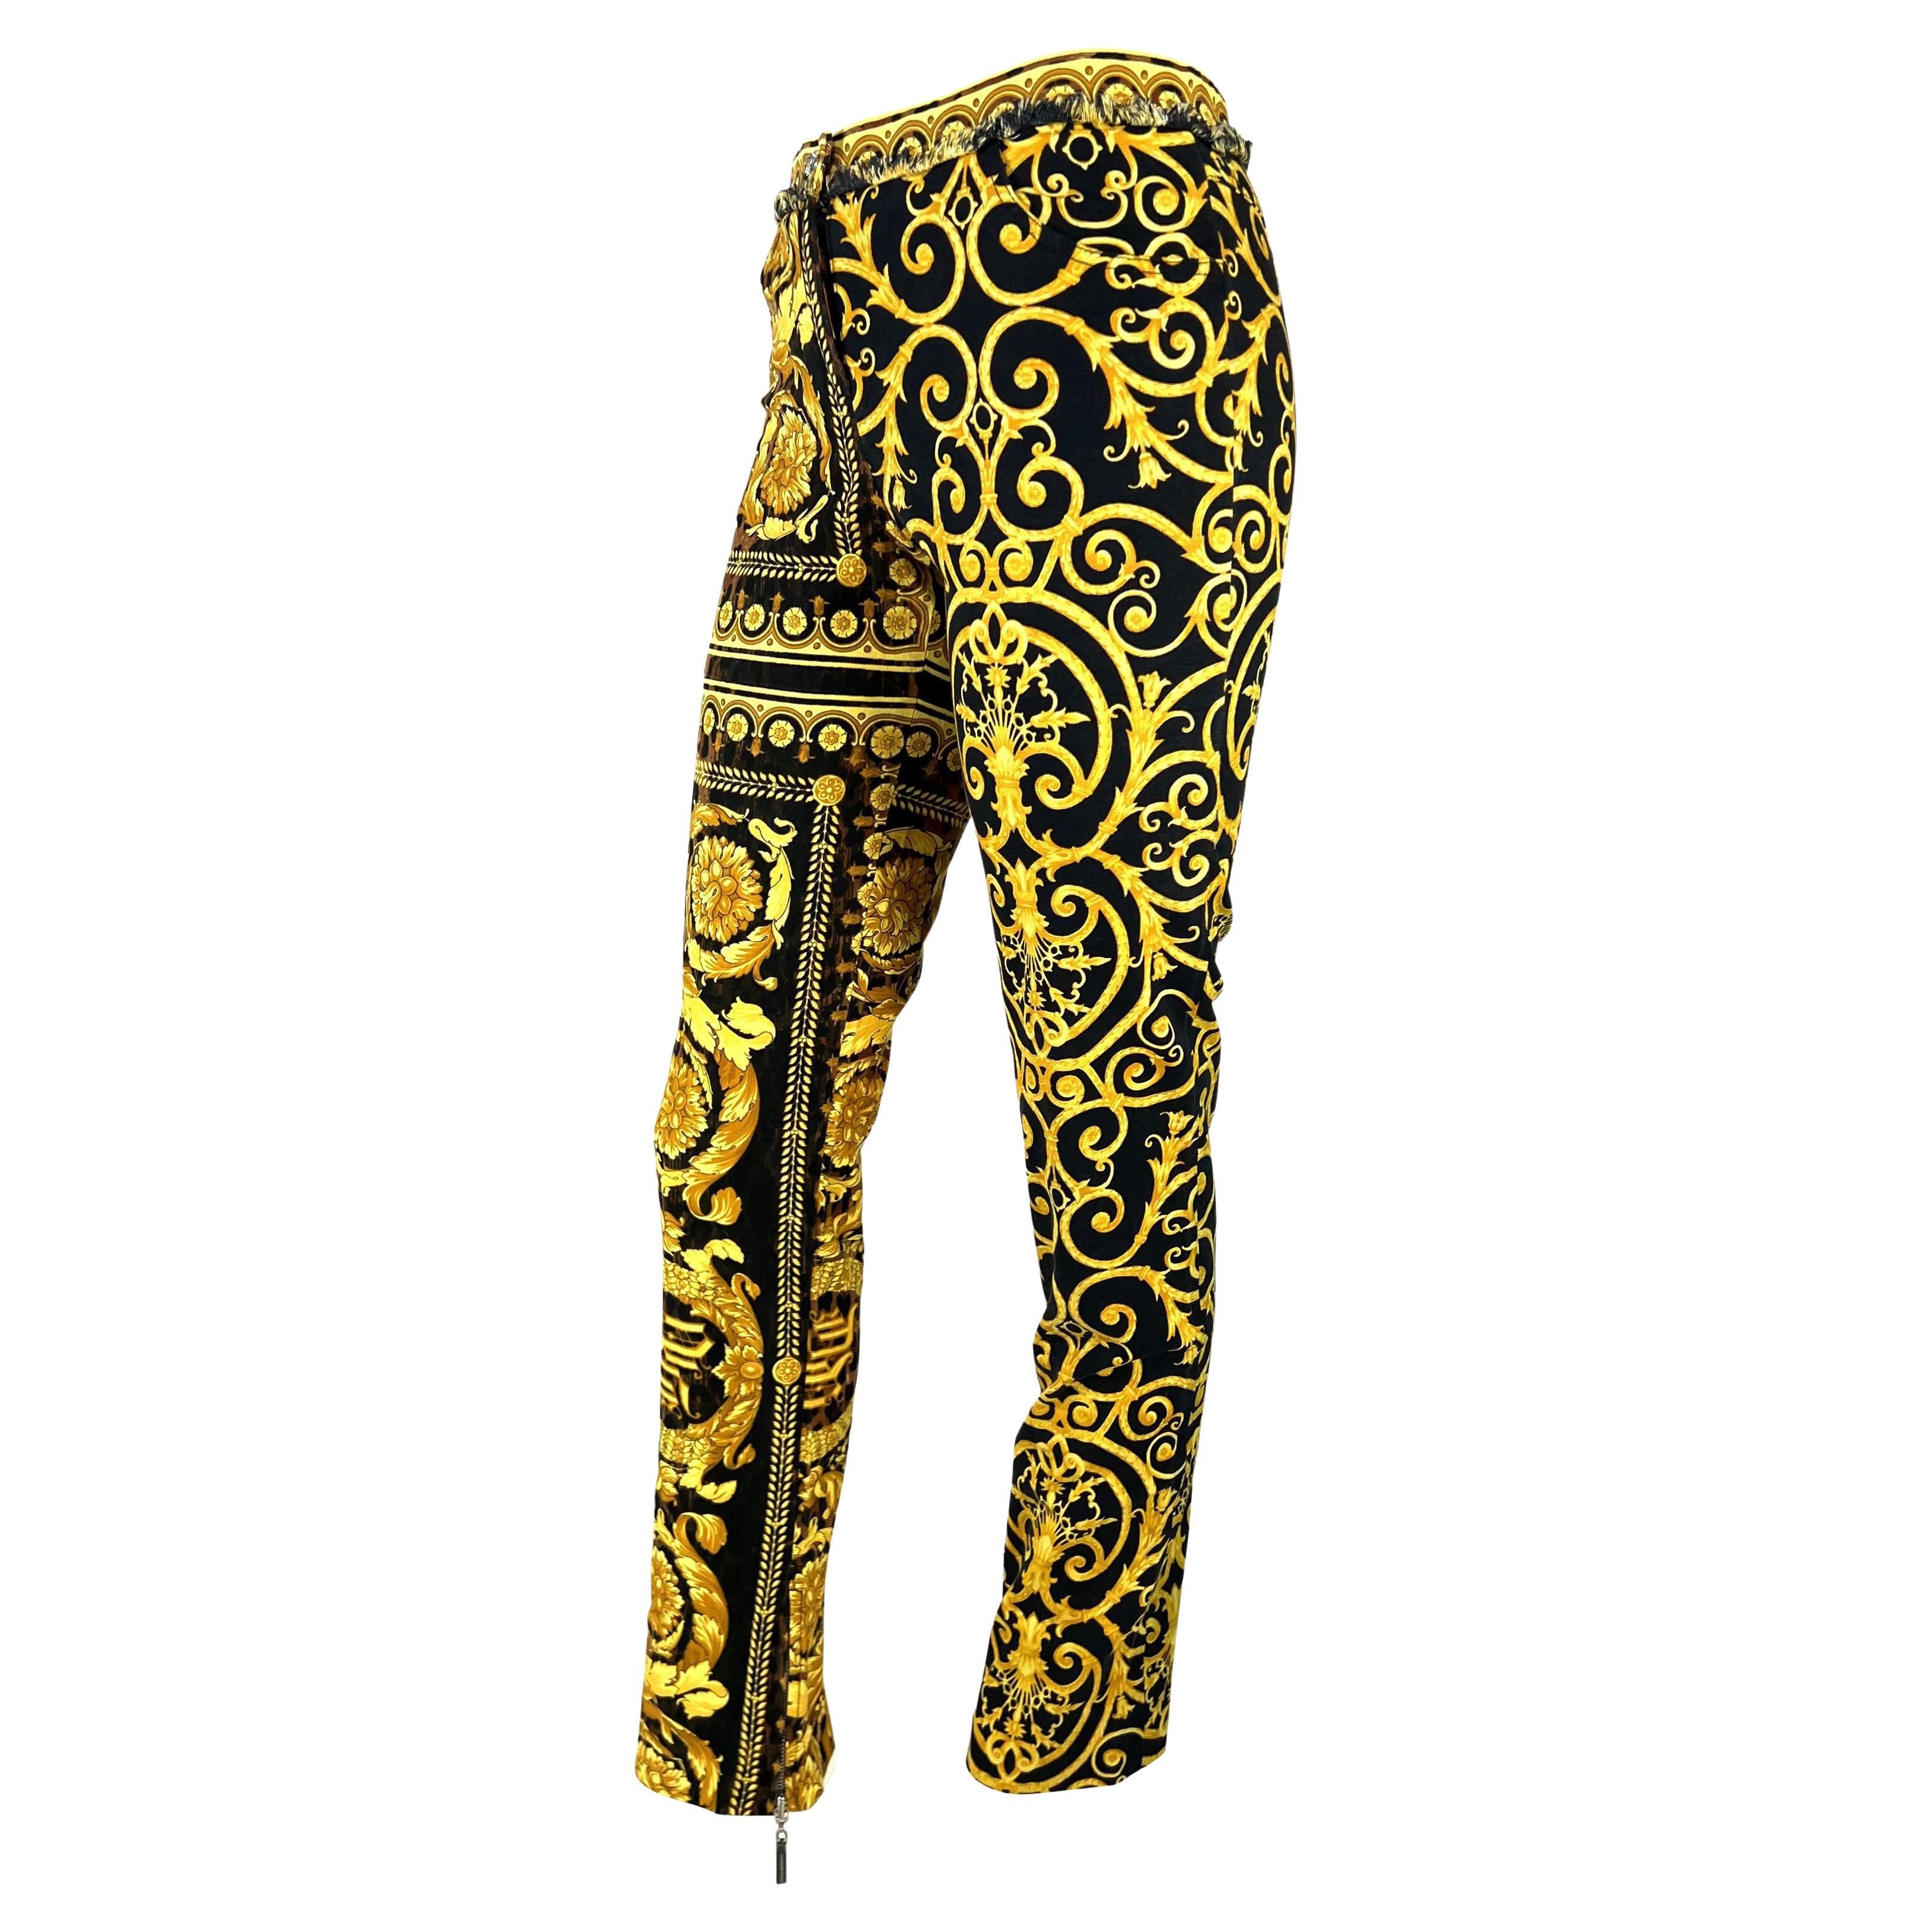 Presenting a pair of stunning yellow and black Versace baroque print jeans, designed by Donatella Versace. From the Spring/Summer 2005 Chaos Couture collection, this fabulous pair of jeans features Versace's famous baroque print atop a cheetah